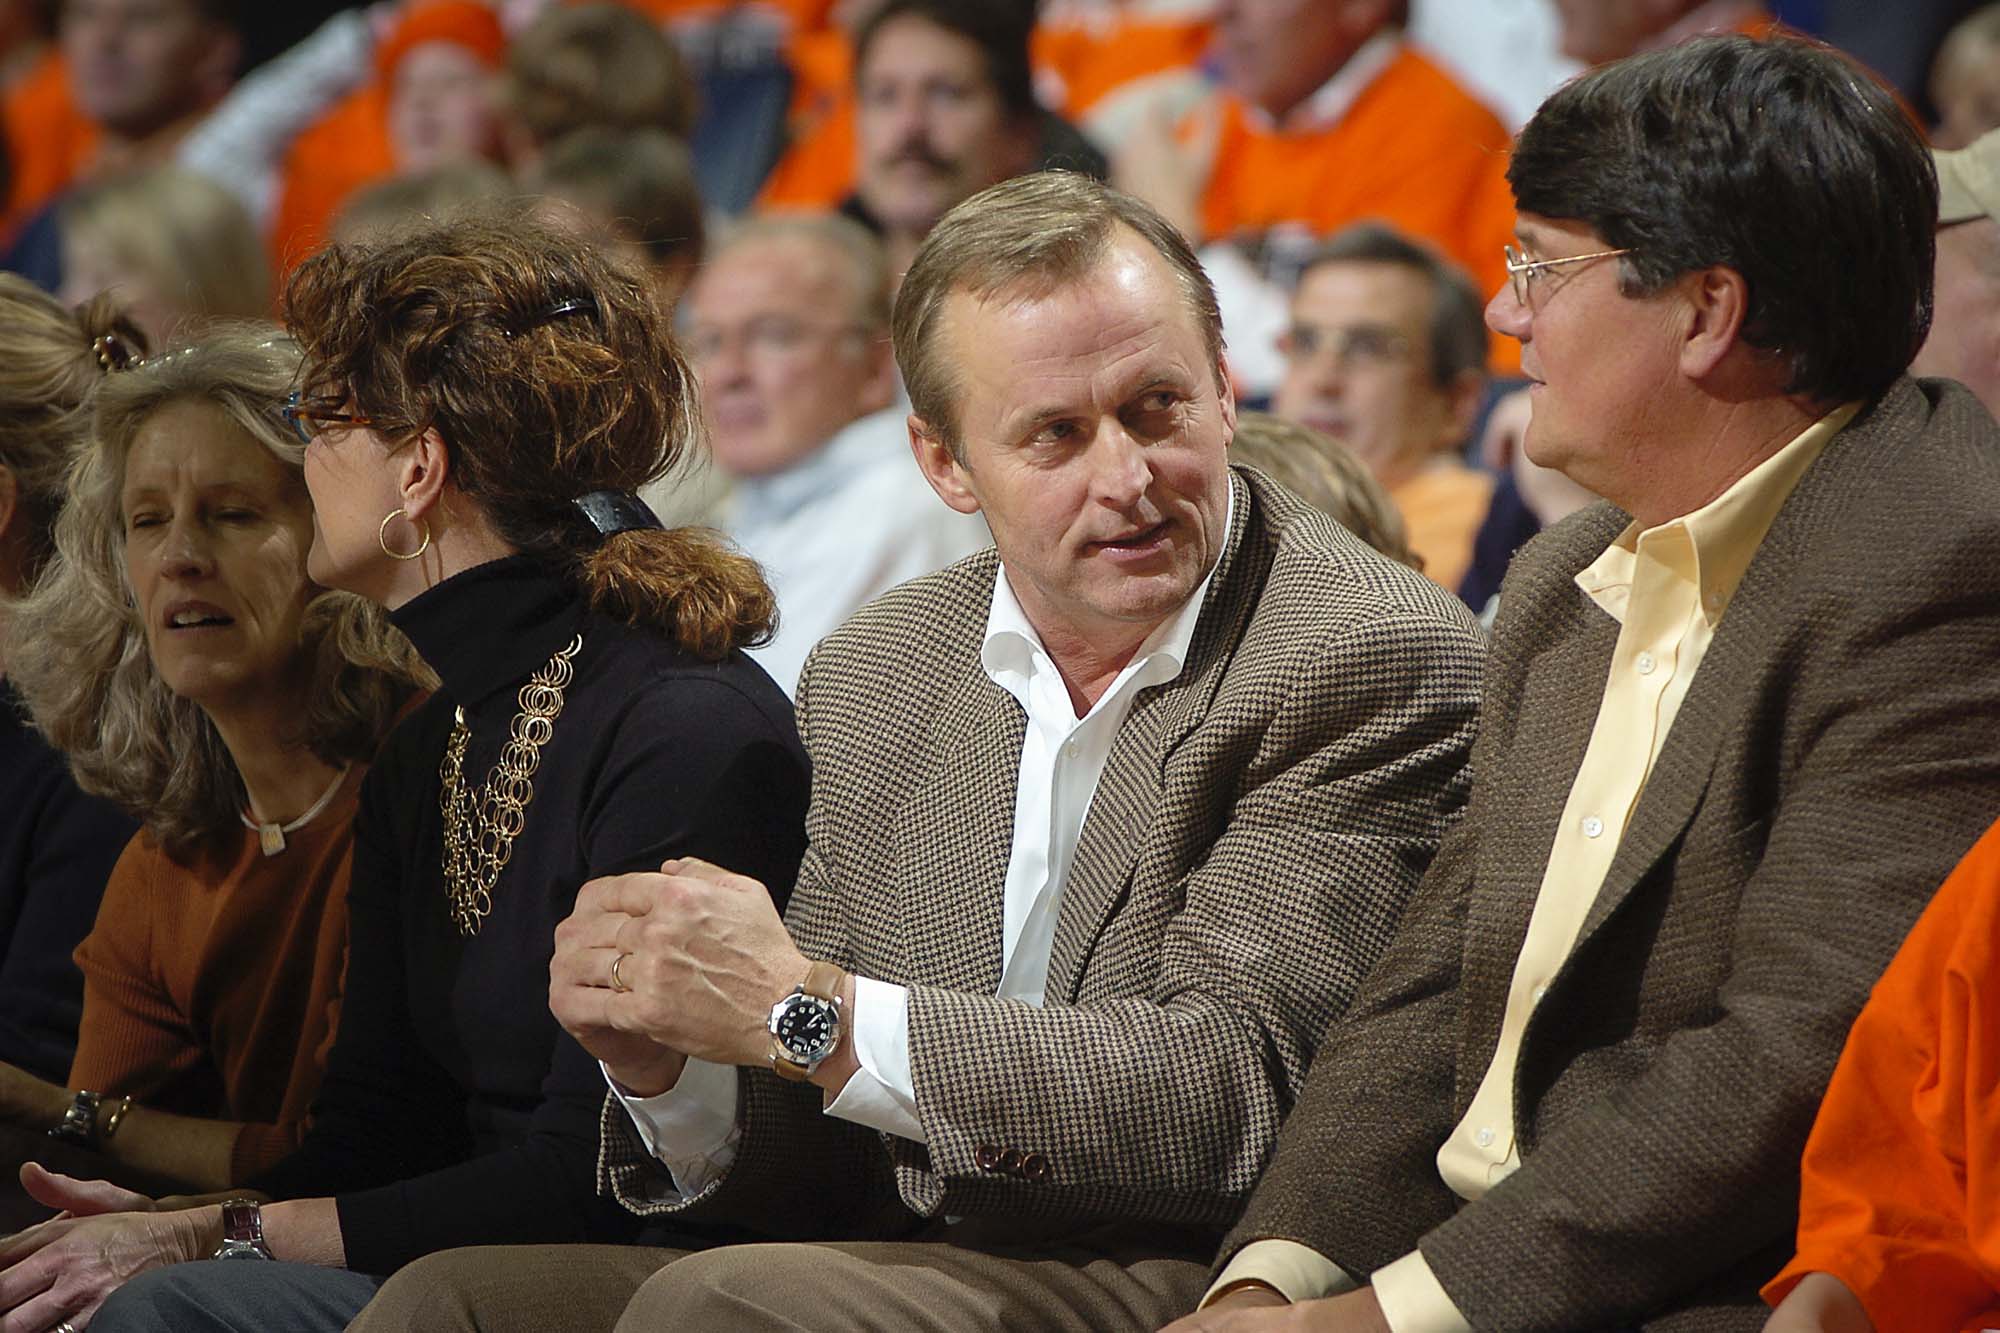 John Grisham sitting in the crowd at a basketball game